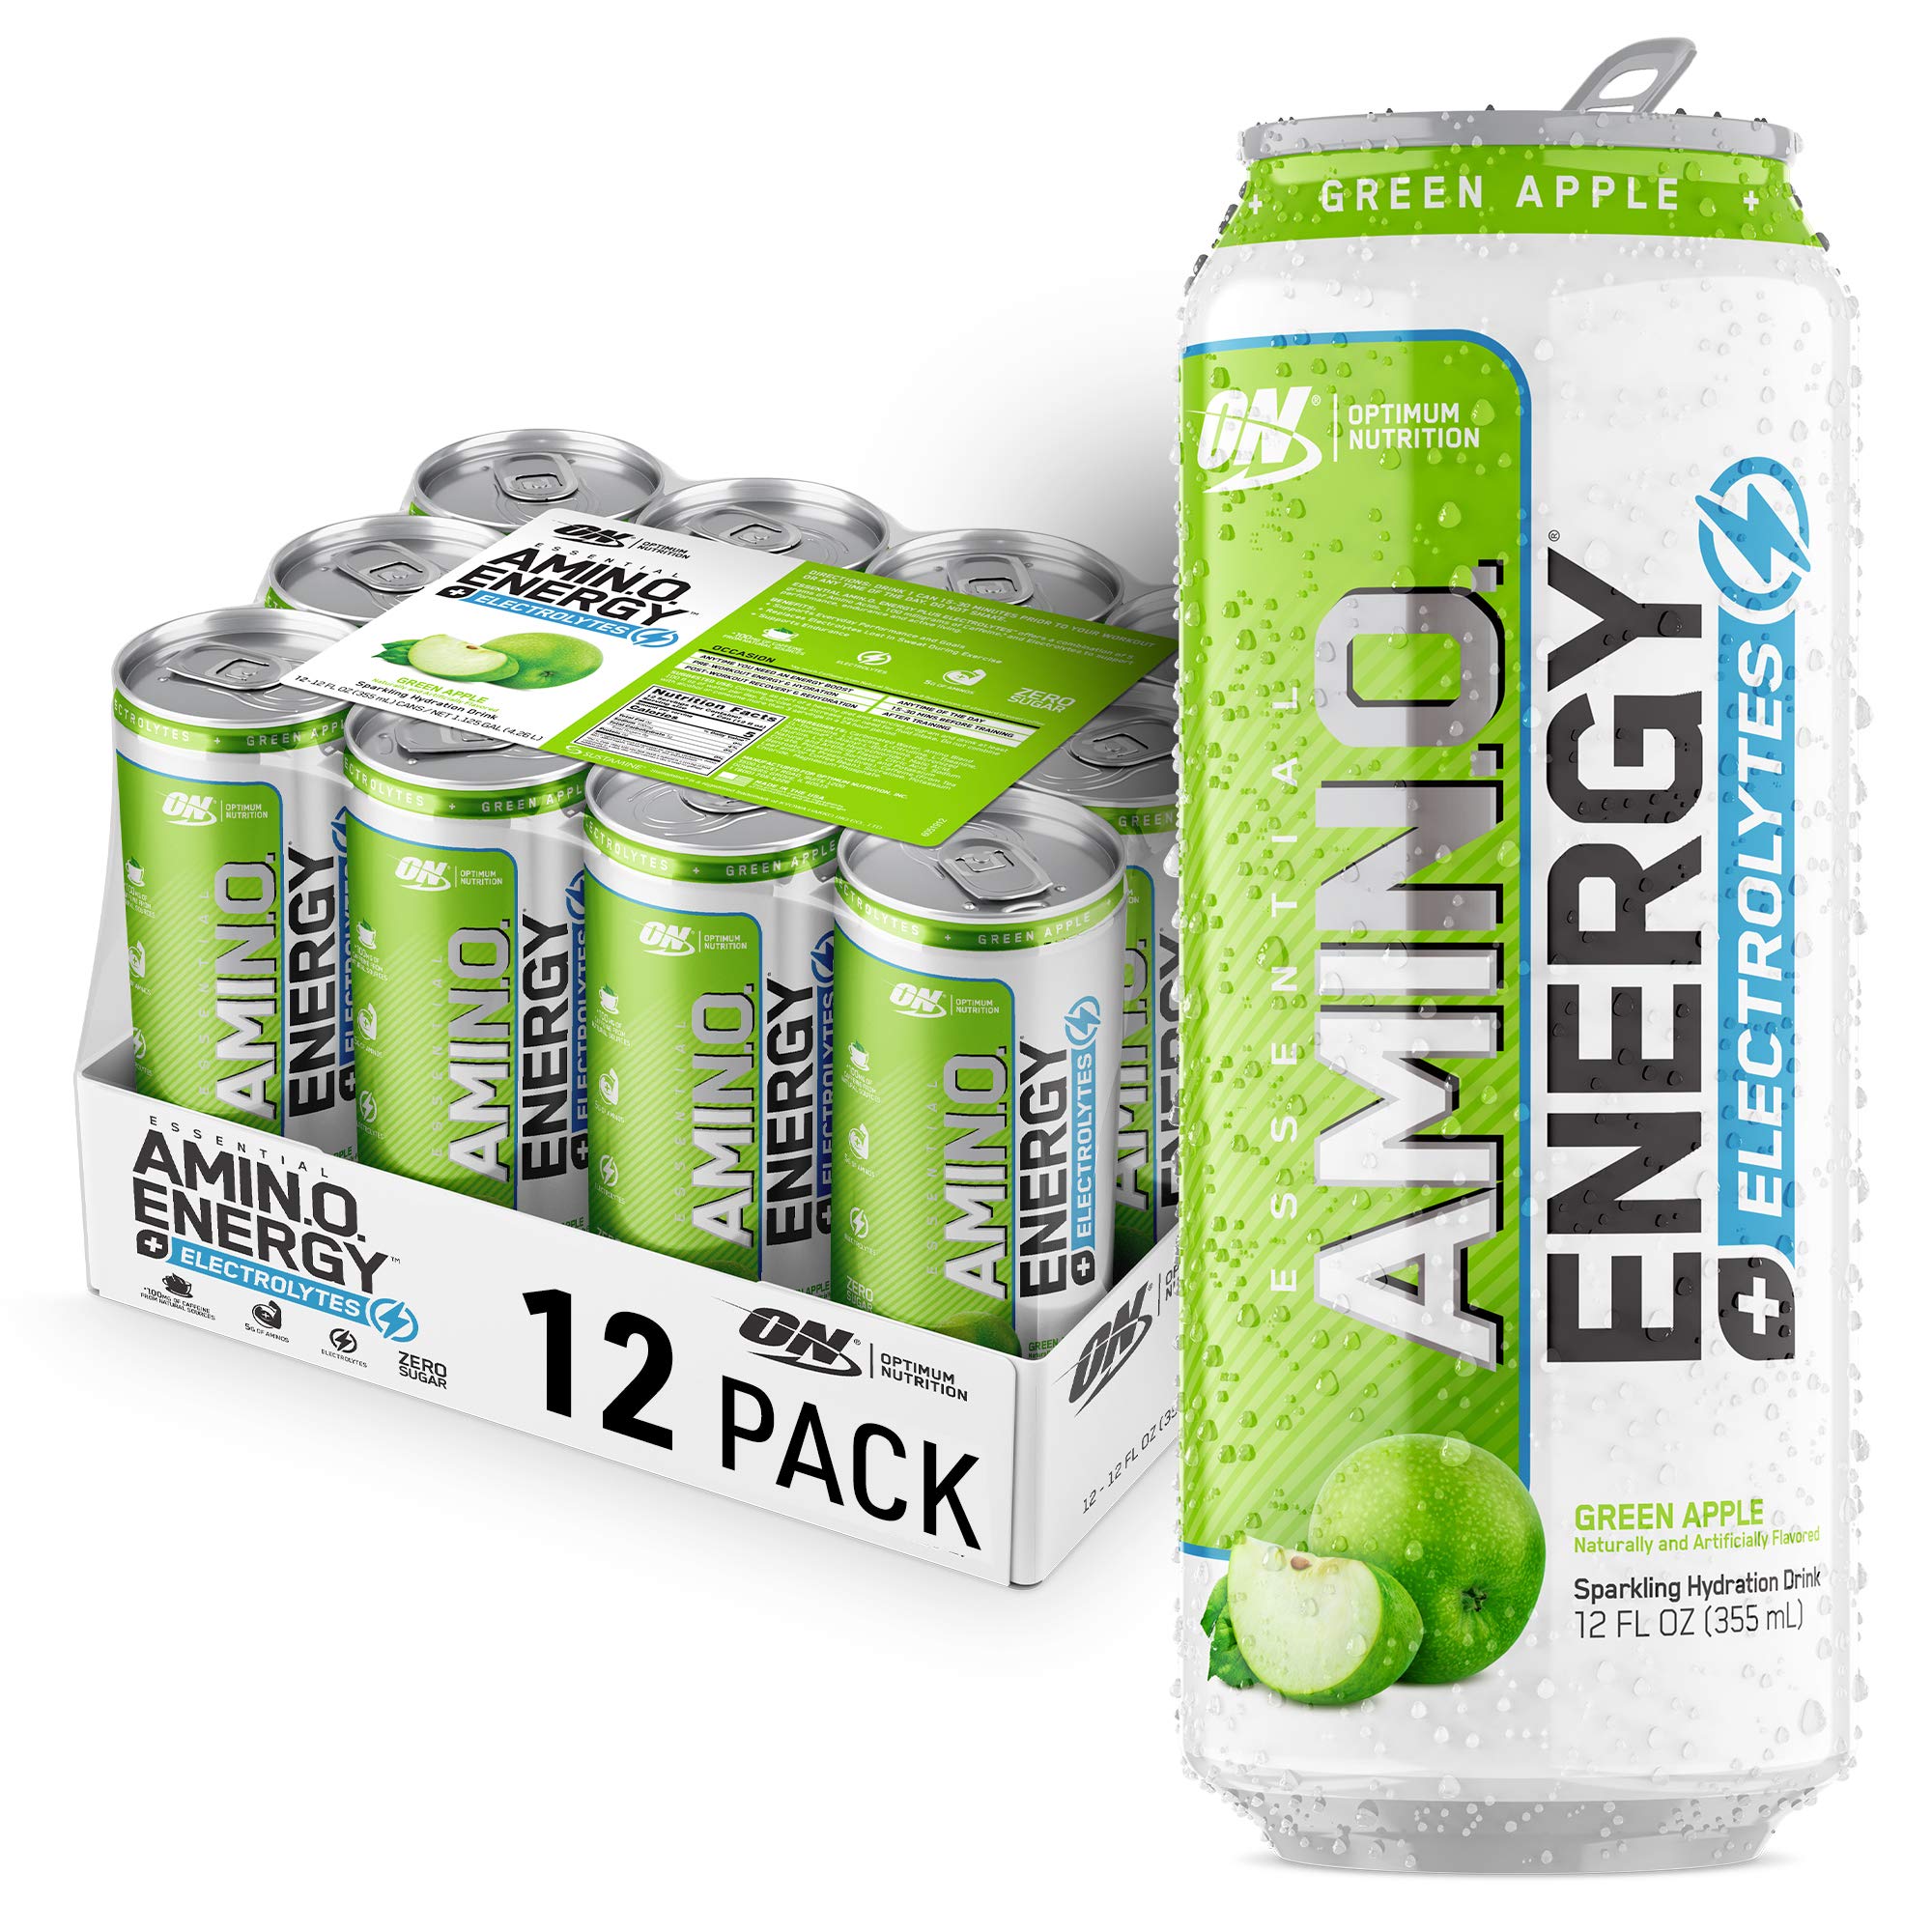 Optimum Nutrition Amino Energy Drink Plus Electrolytes for Hydration, Sugar Free, Caffeine for Pre-Workout Energy and Amino Acids/BCAAs for Post-Workout Recovery - Green Apple, 12 Fl Oz (12 Pack)